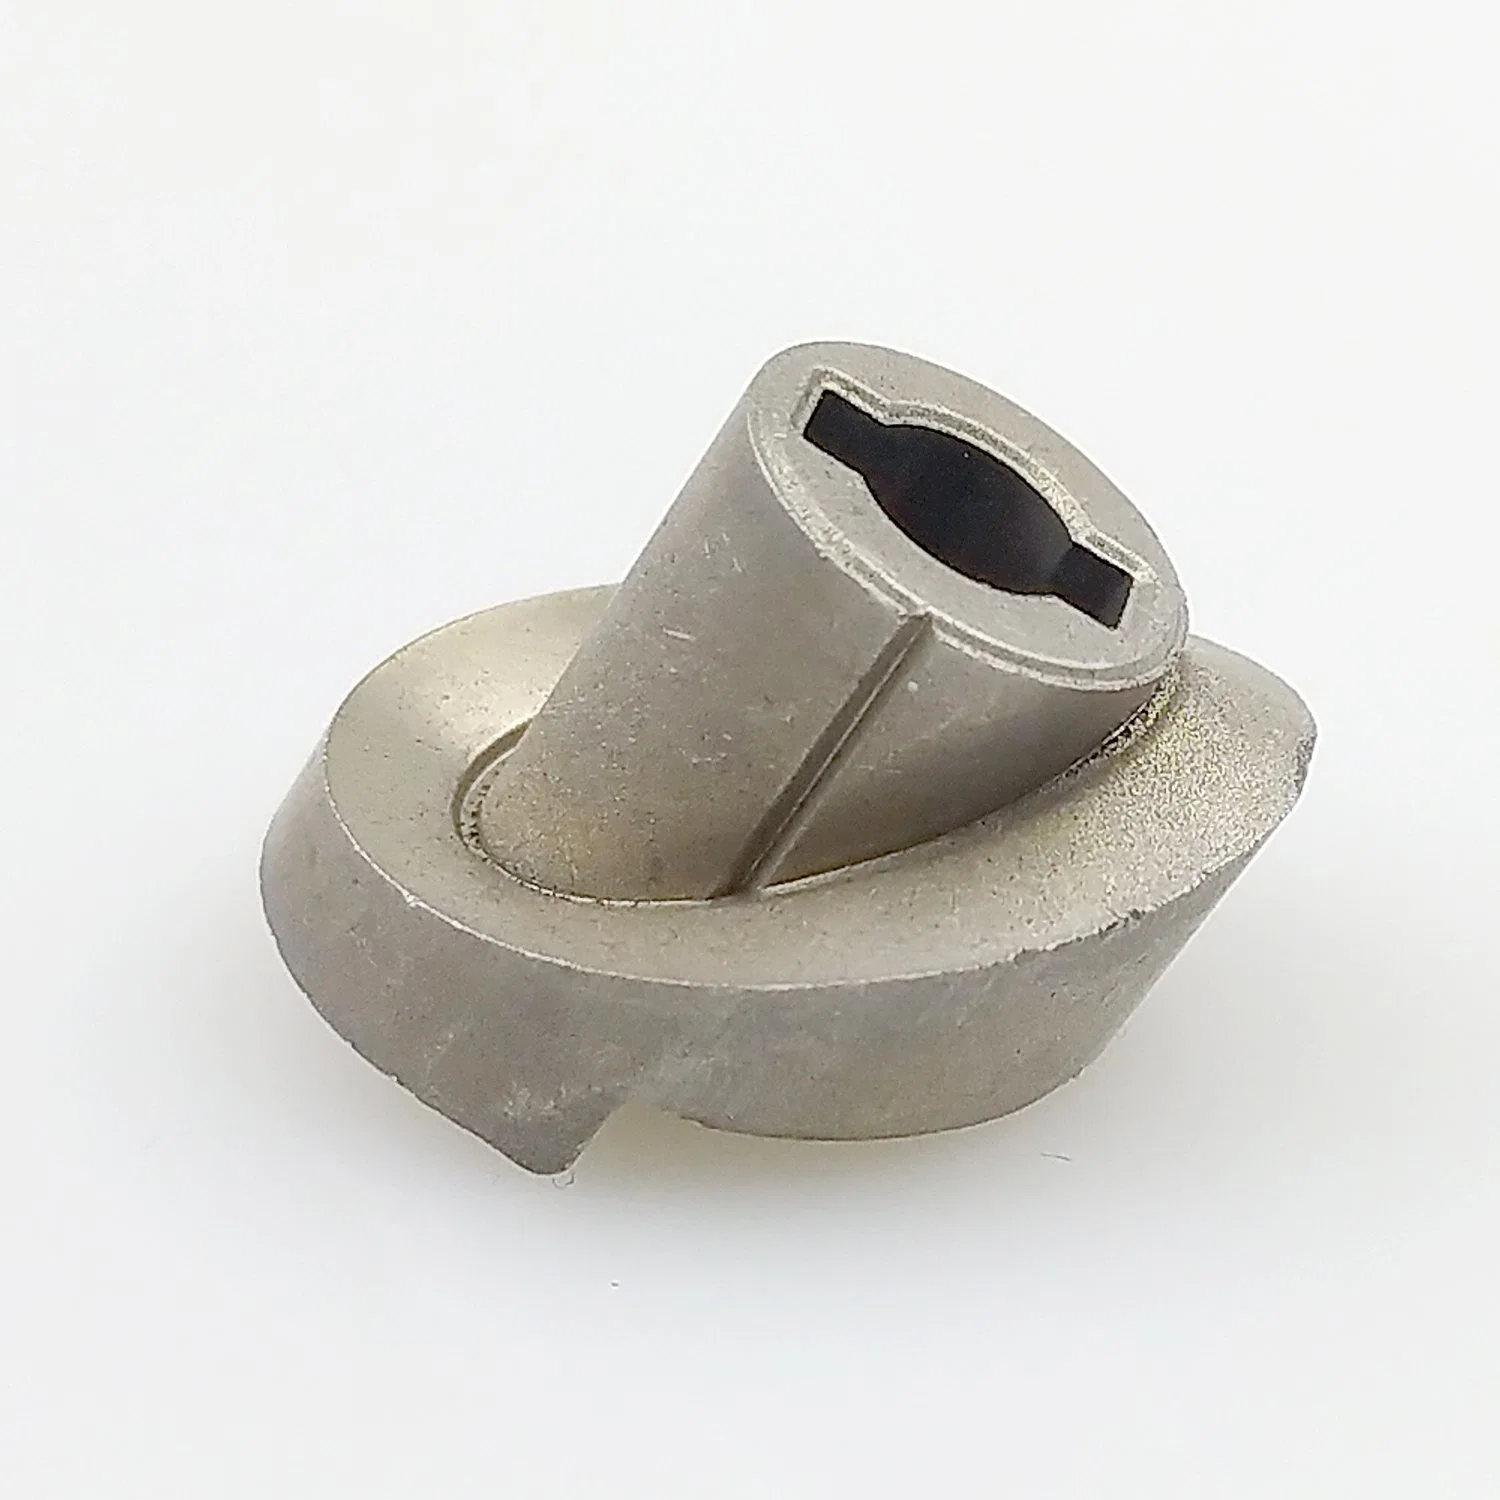 OEM Powder Metallurgy Machinery Processing Parts MIM Sintered Metal Injection Molded Casting